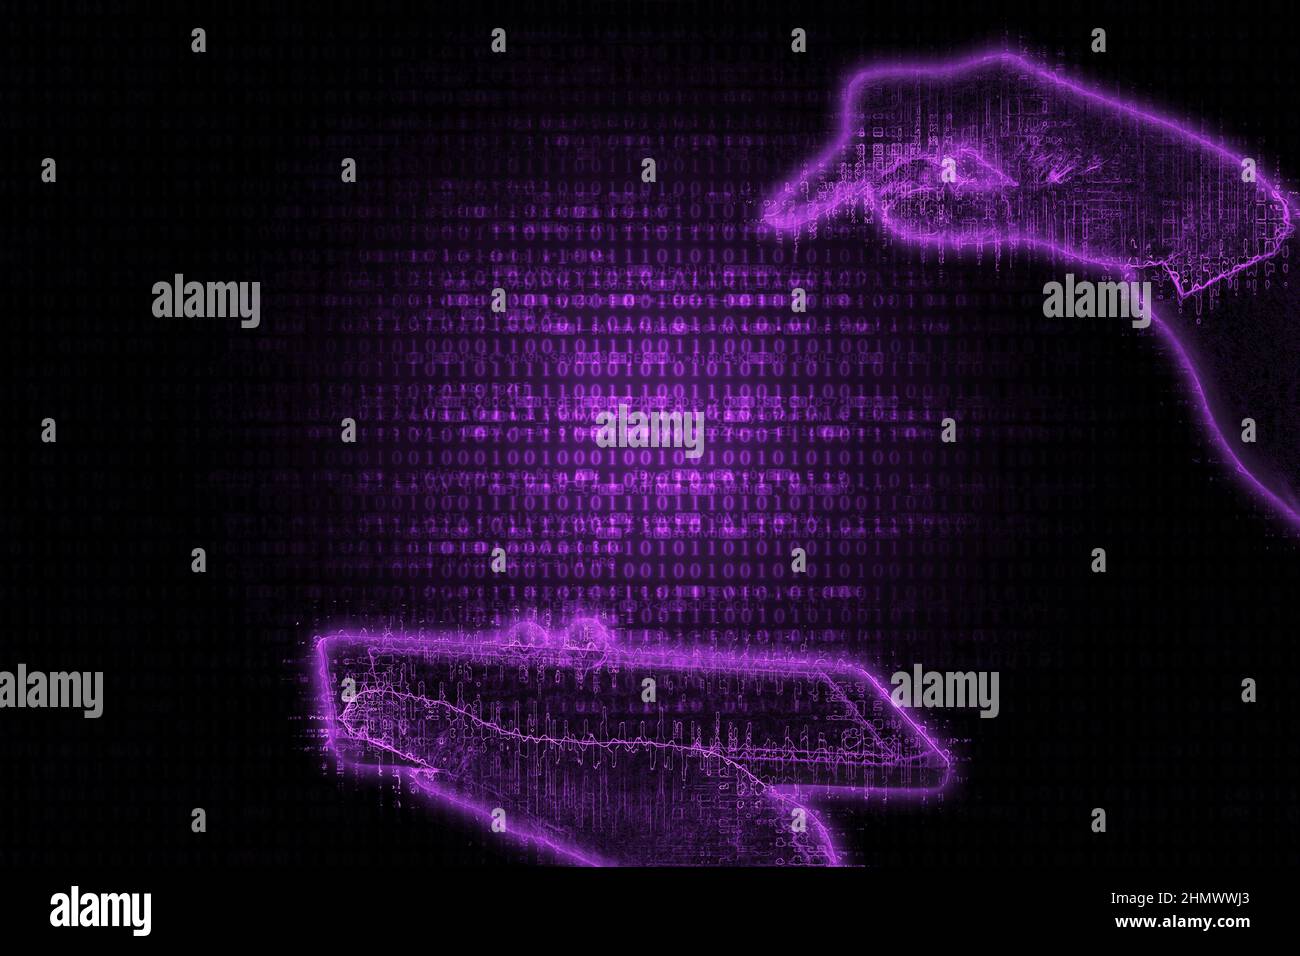 Blurred hand holding phone and hand pointing to space in futuristic purple neon background with matrix binary code. Darkweb, darknet, hacking concept. Stock Photo